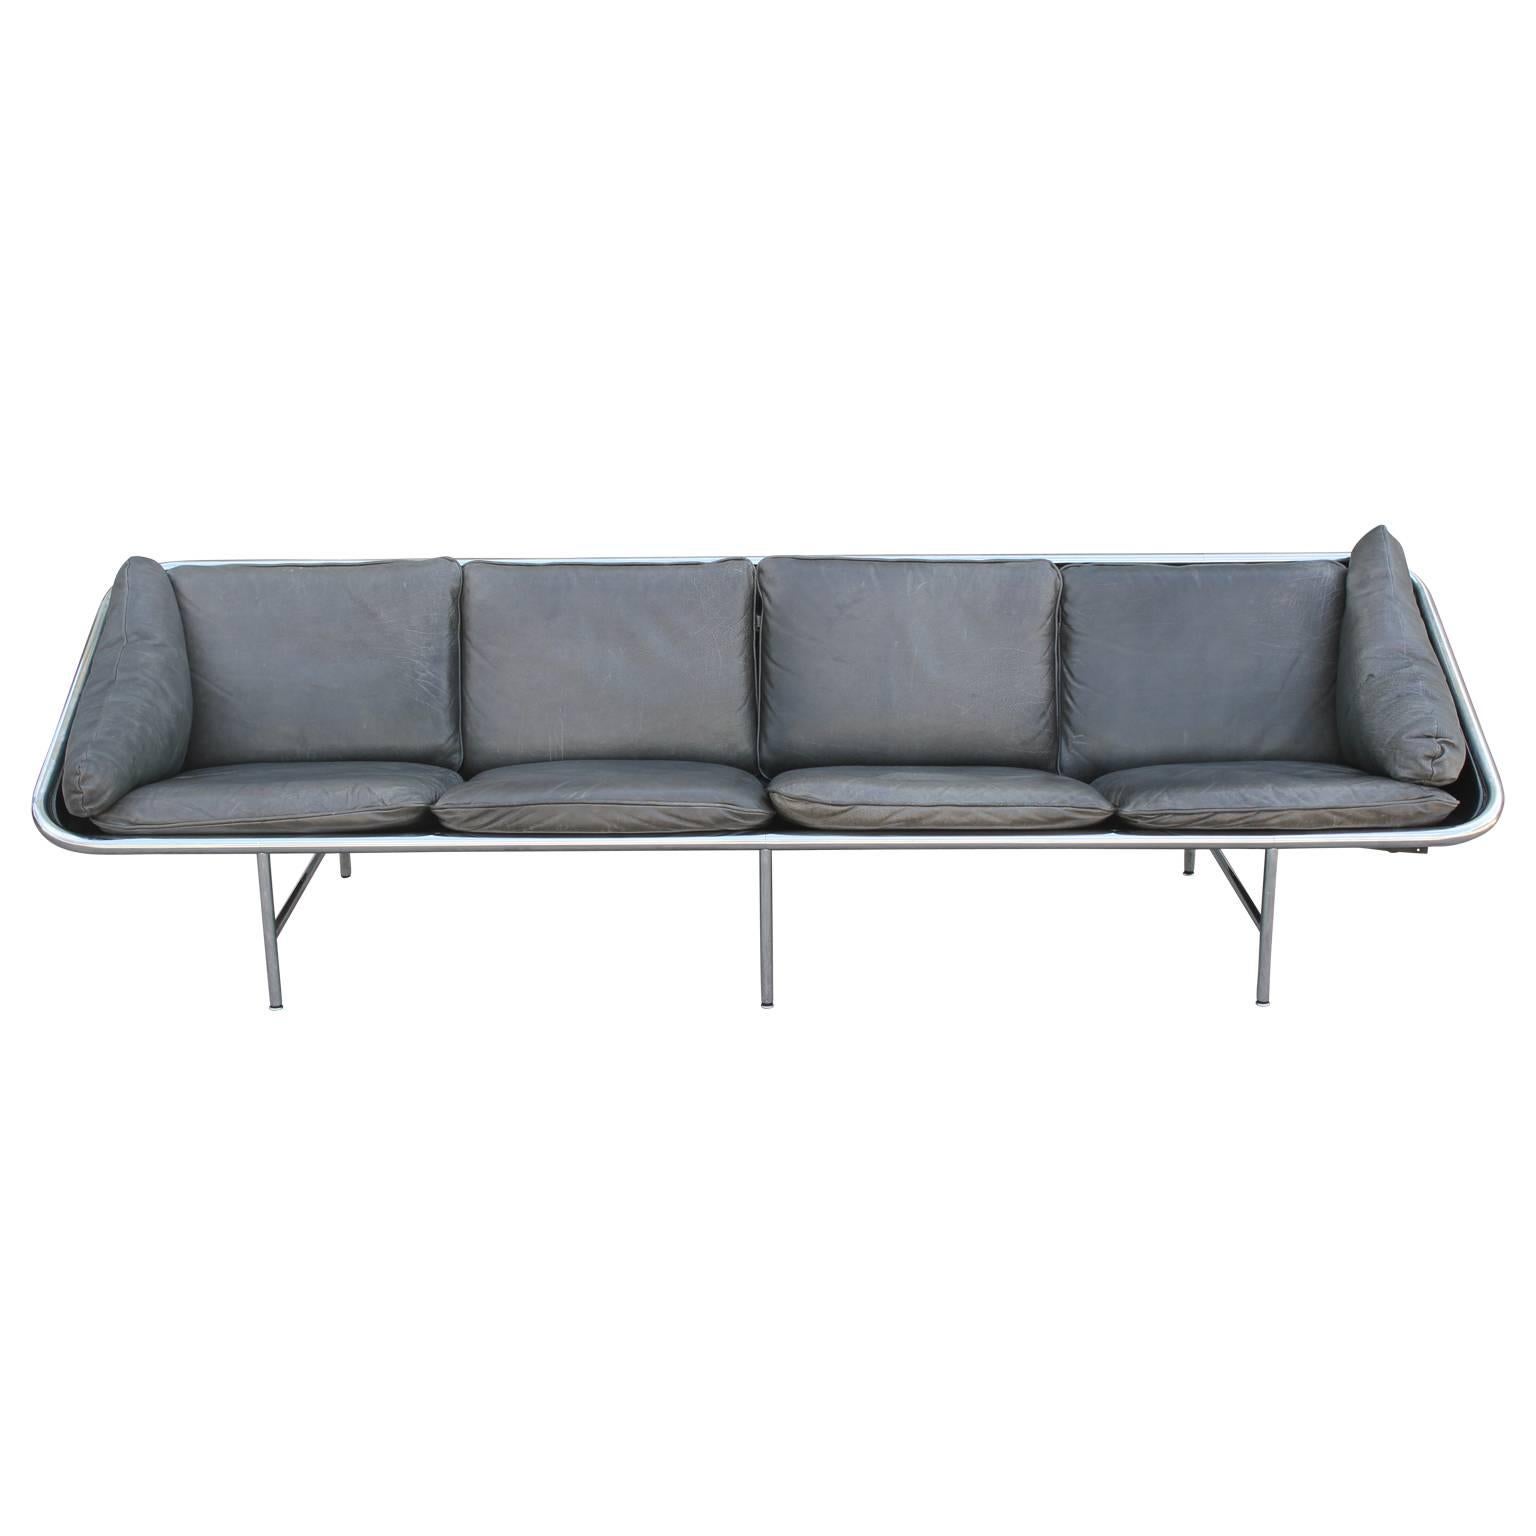 Mid-20th Century Modern George Nelson for Herman Miller IBM Chrome and Leather Sling Sofa